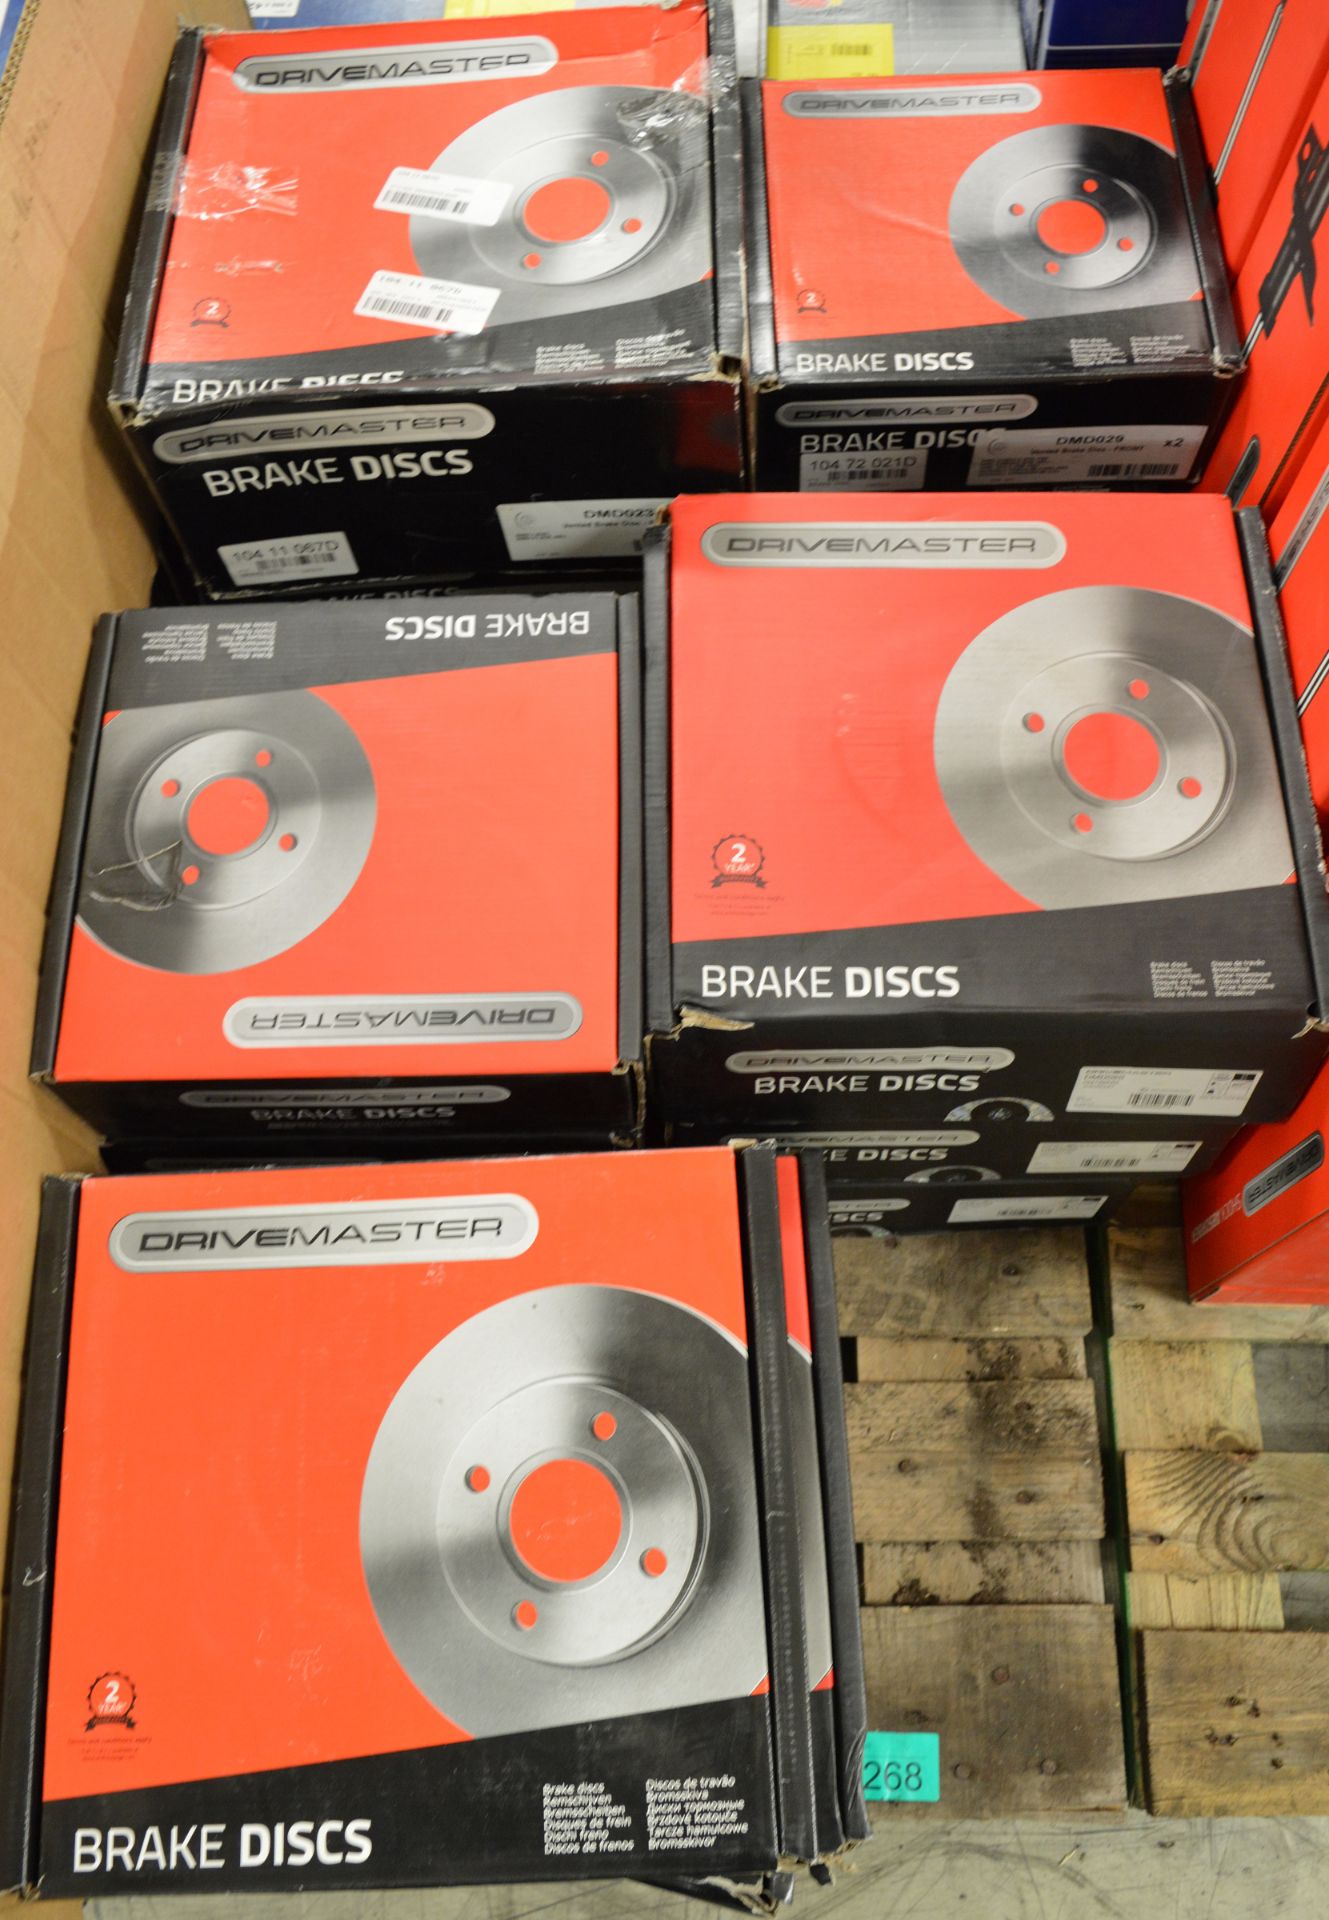 DriveMaster Brake Discs - See photos for part numbers - Image 2 of 10